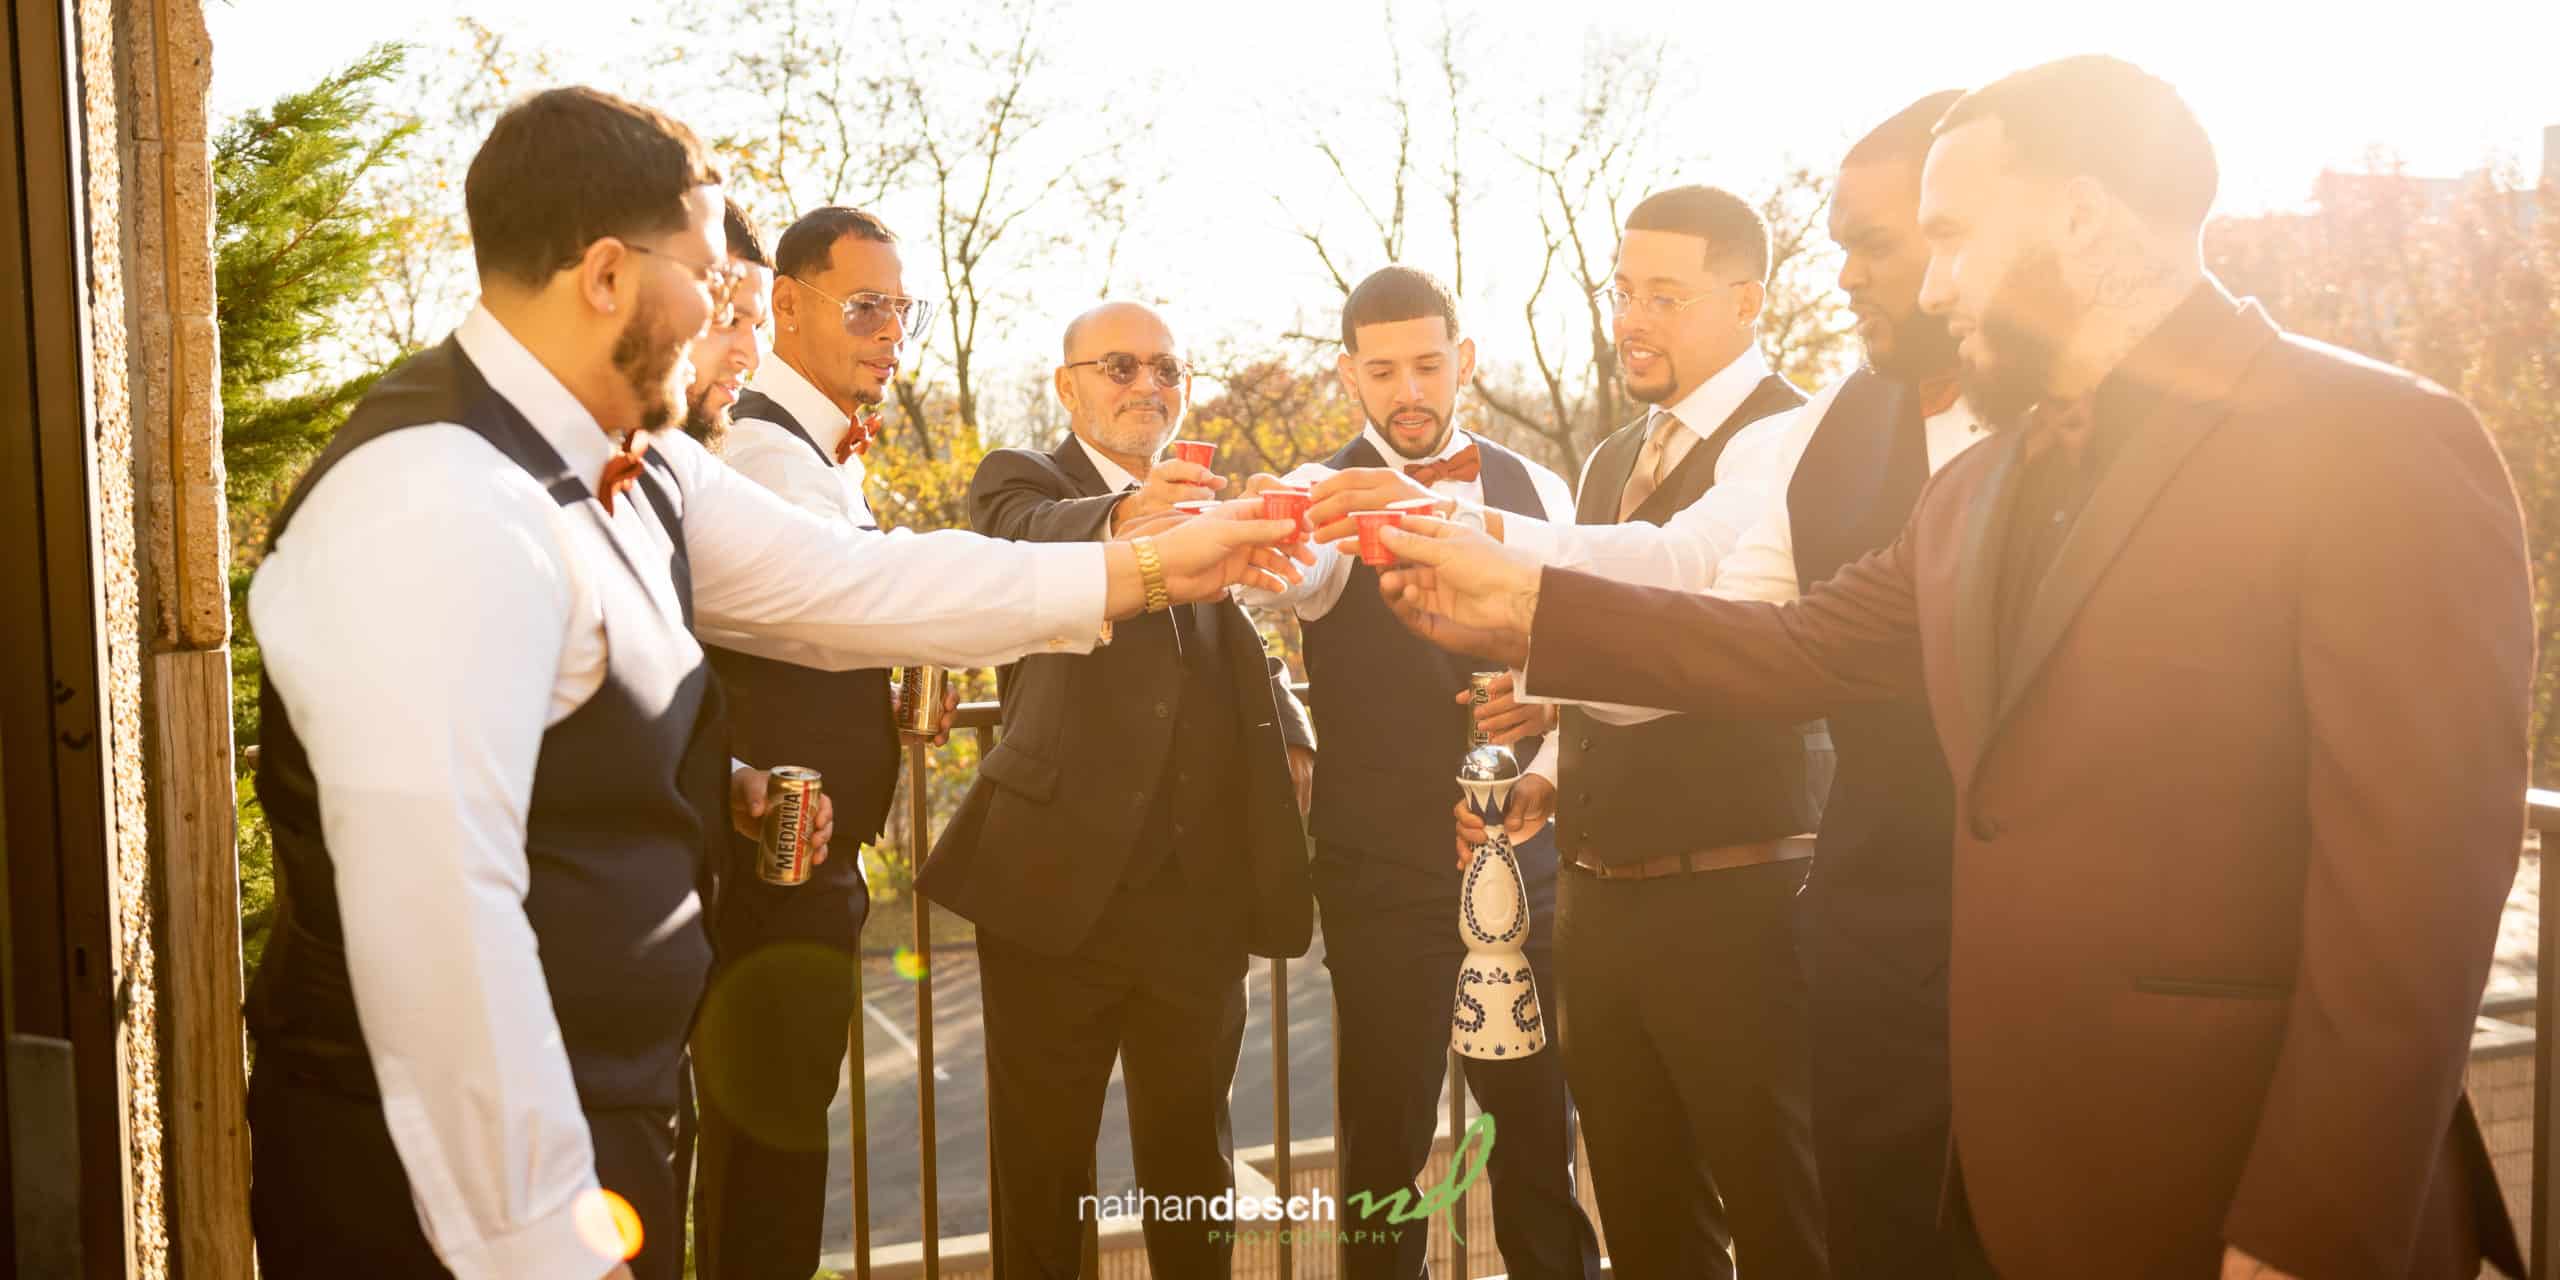 Wedding Pictures We Love in 2020